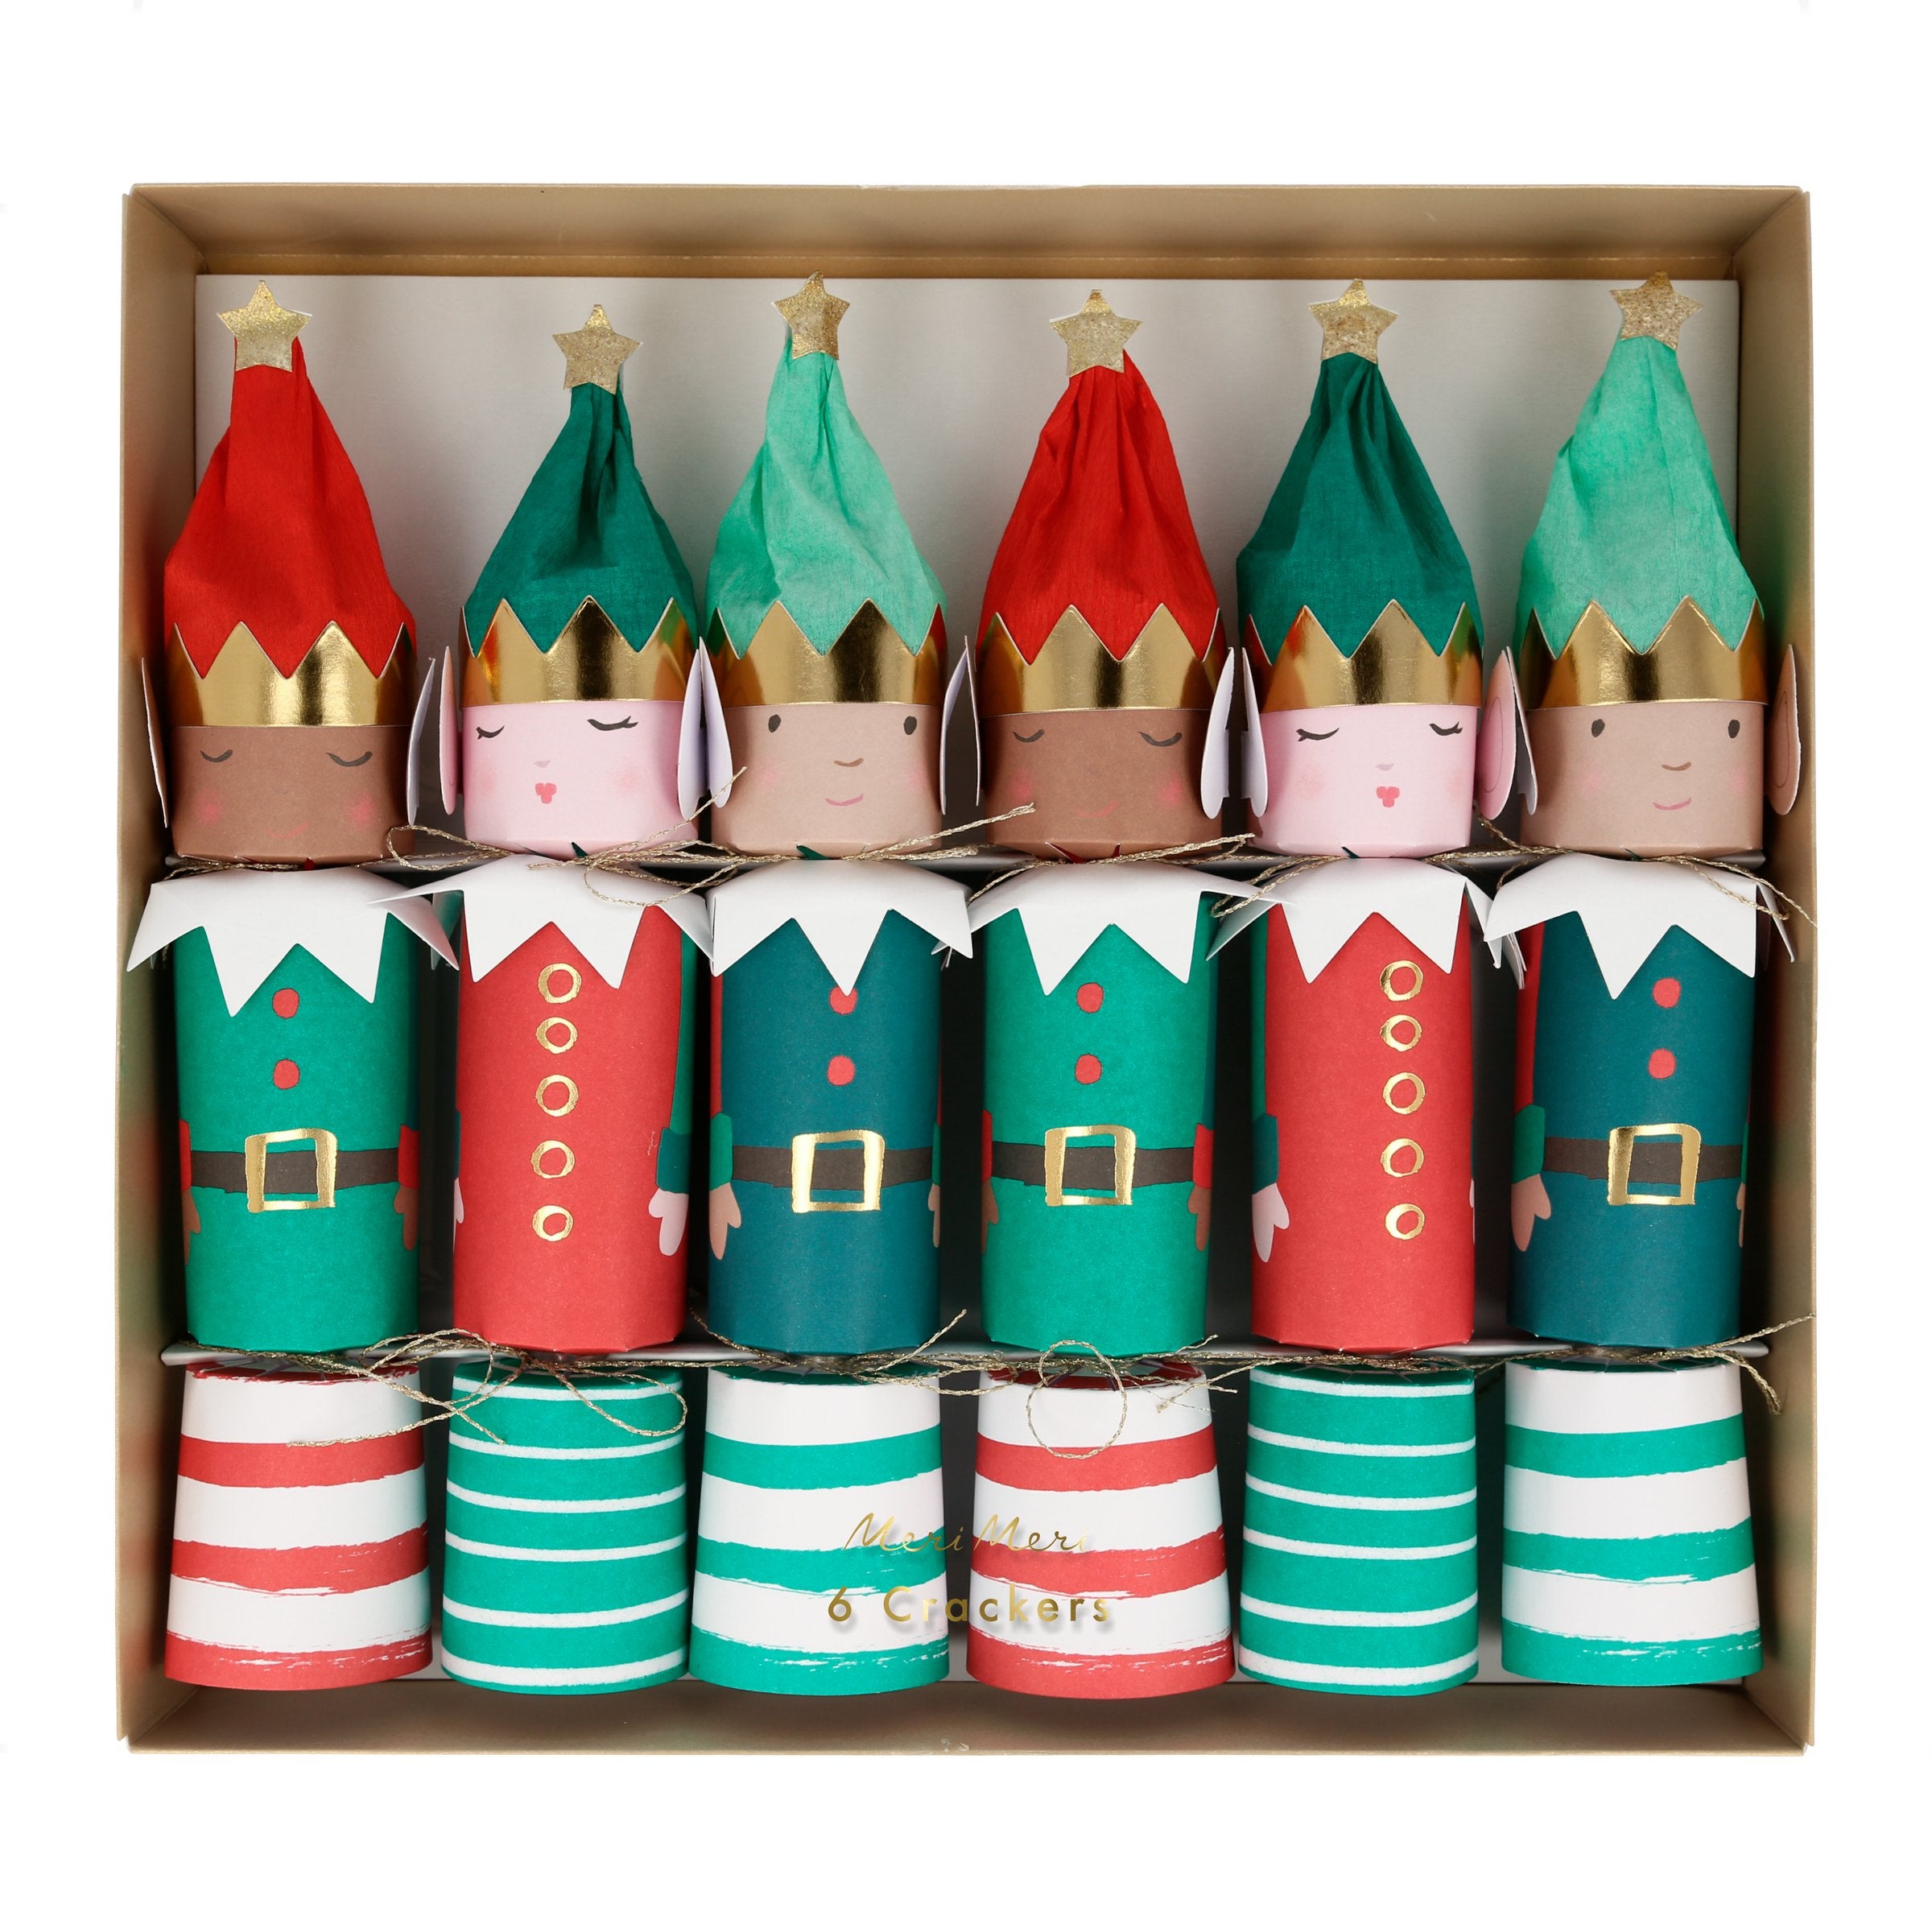 Our elf crackers are the perfect kids' Christmas crackers, with lots of fabulous embellishments.